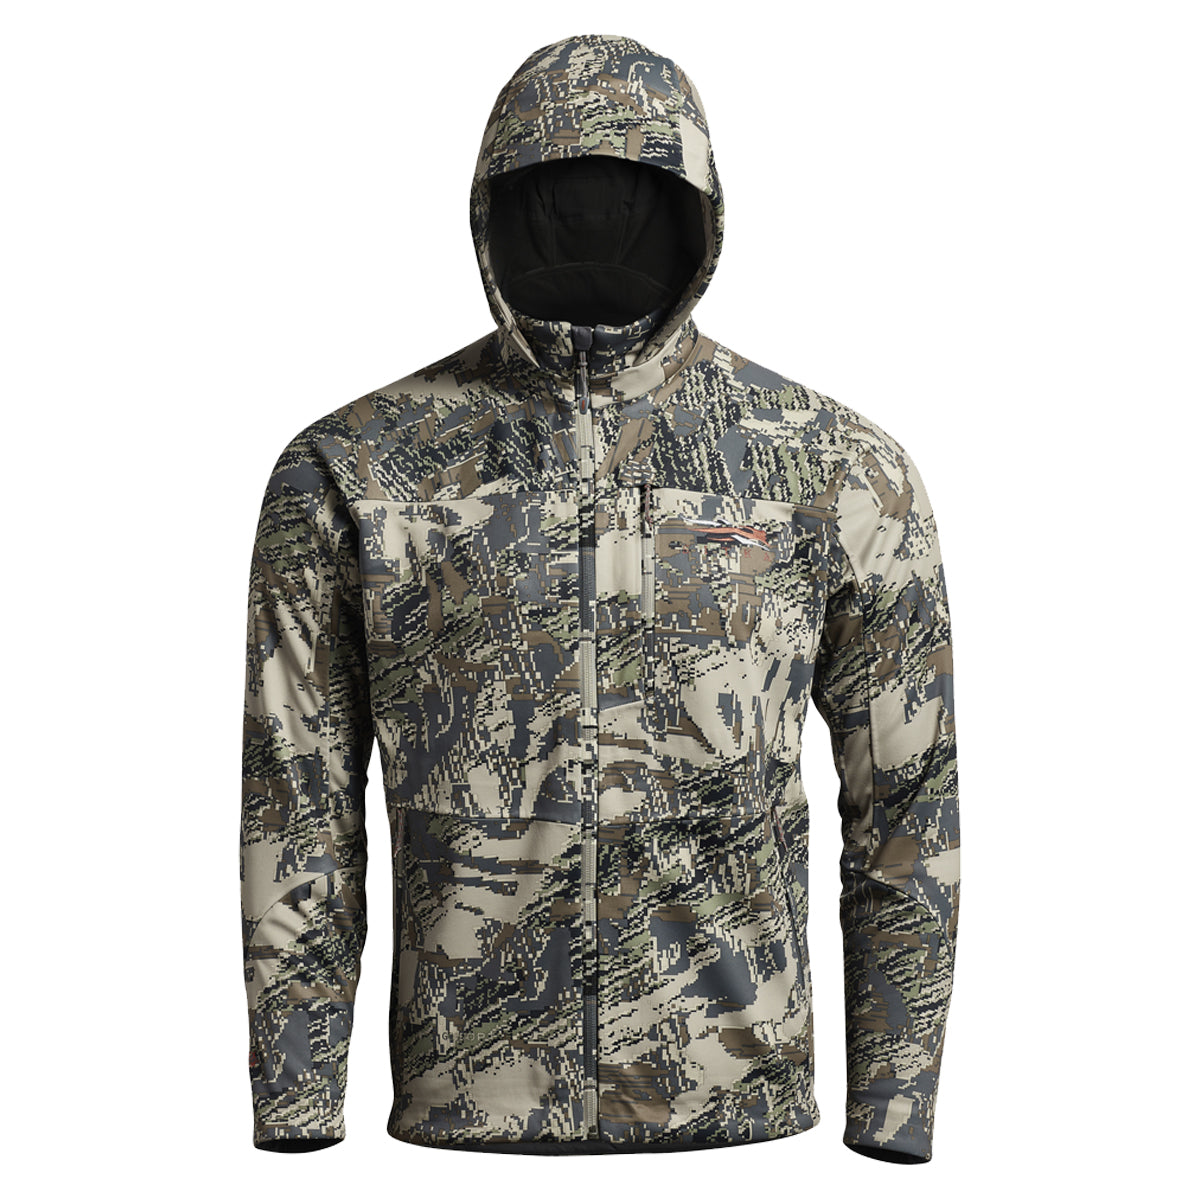 Sitka Jetstream Jacket in Optifade Open Country by GOHUNT | Sitka - GOHUNT Shop